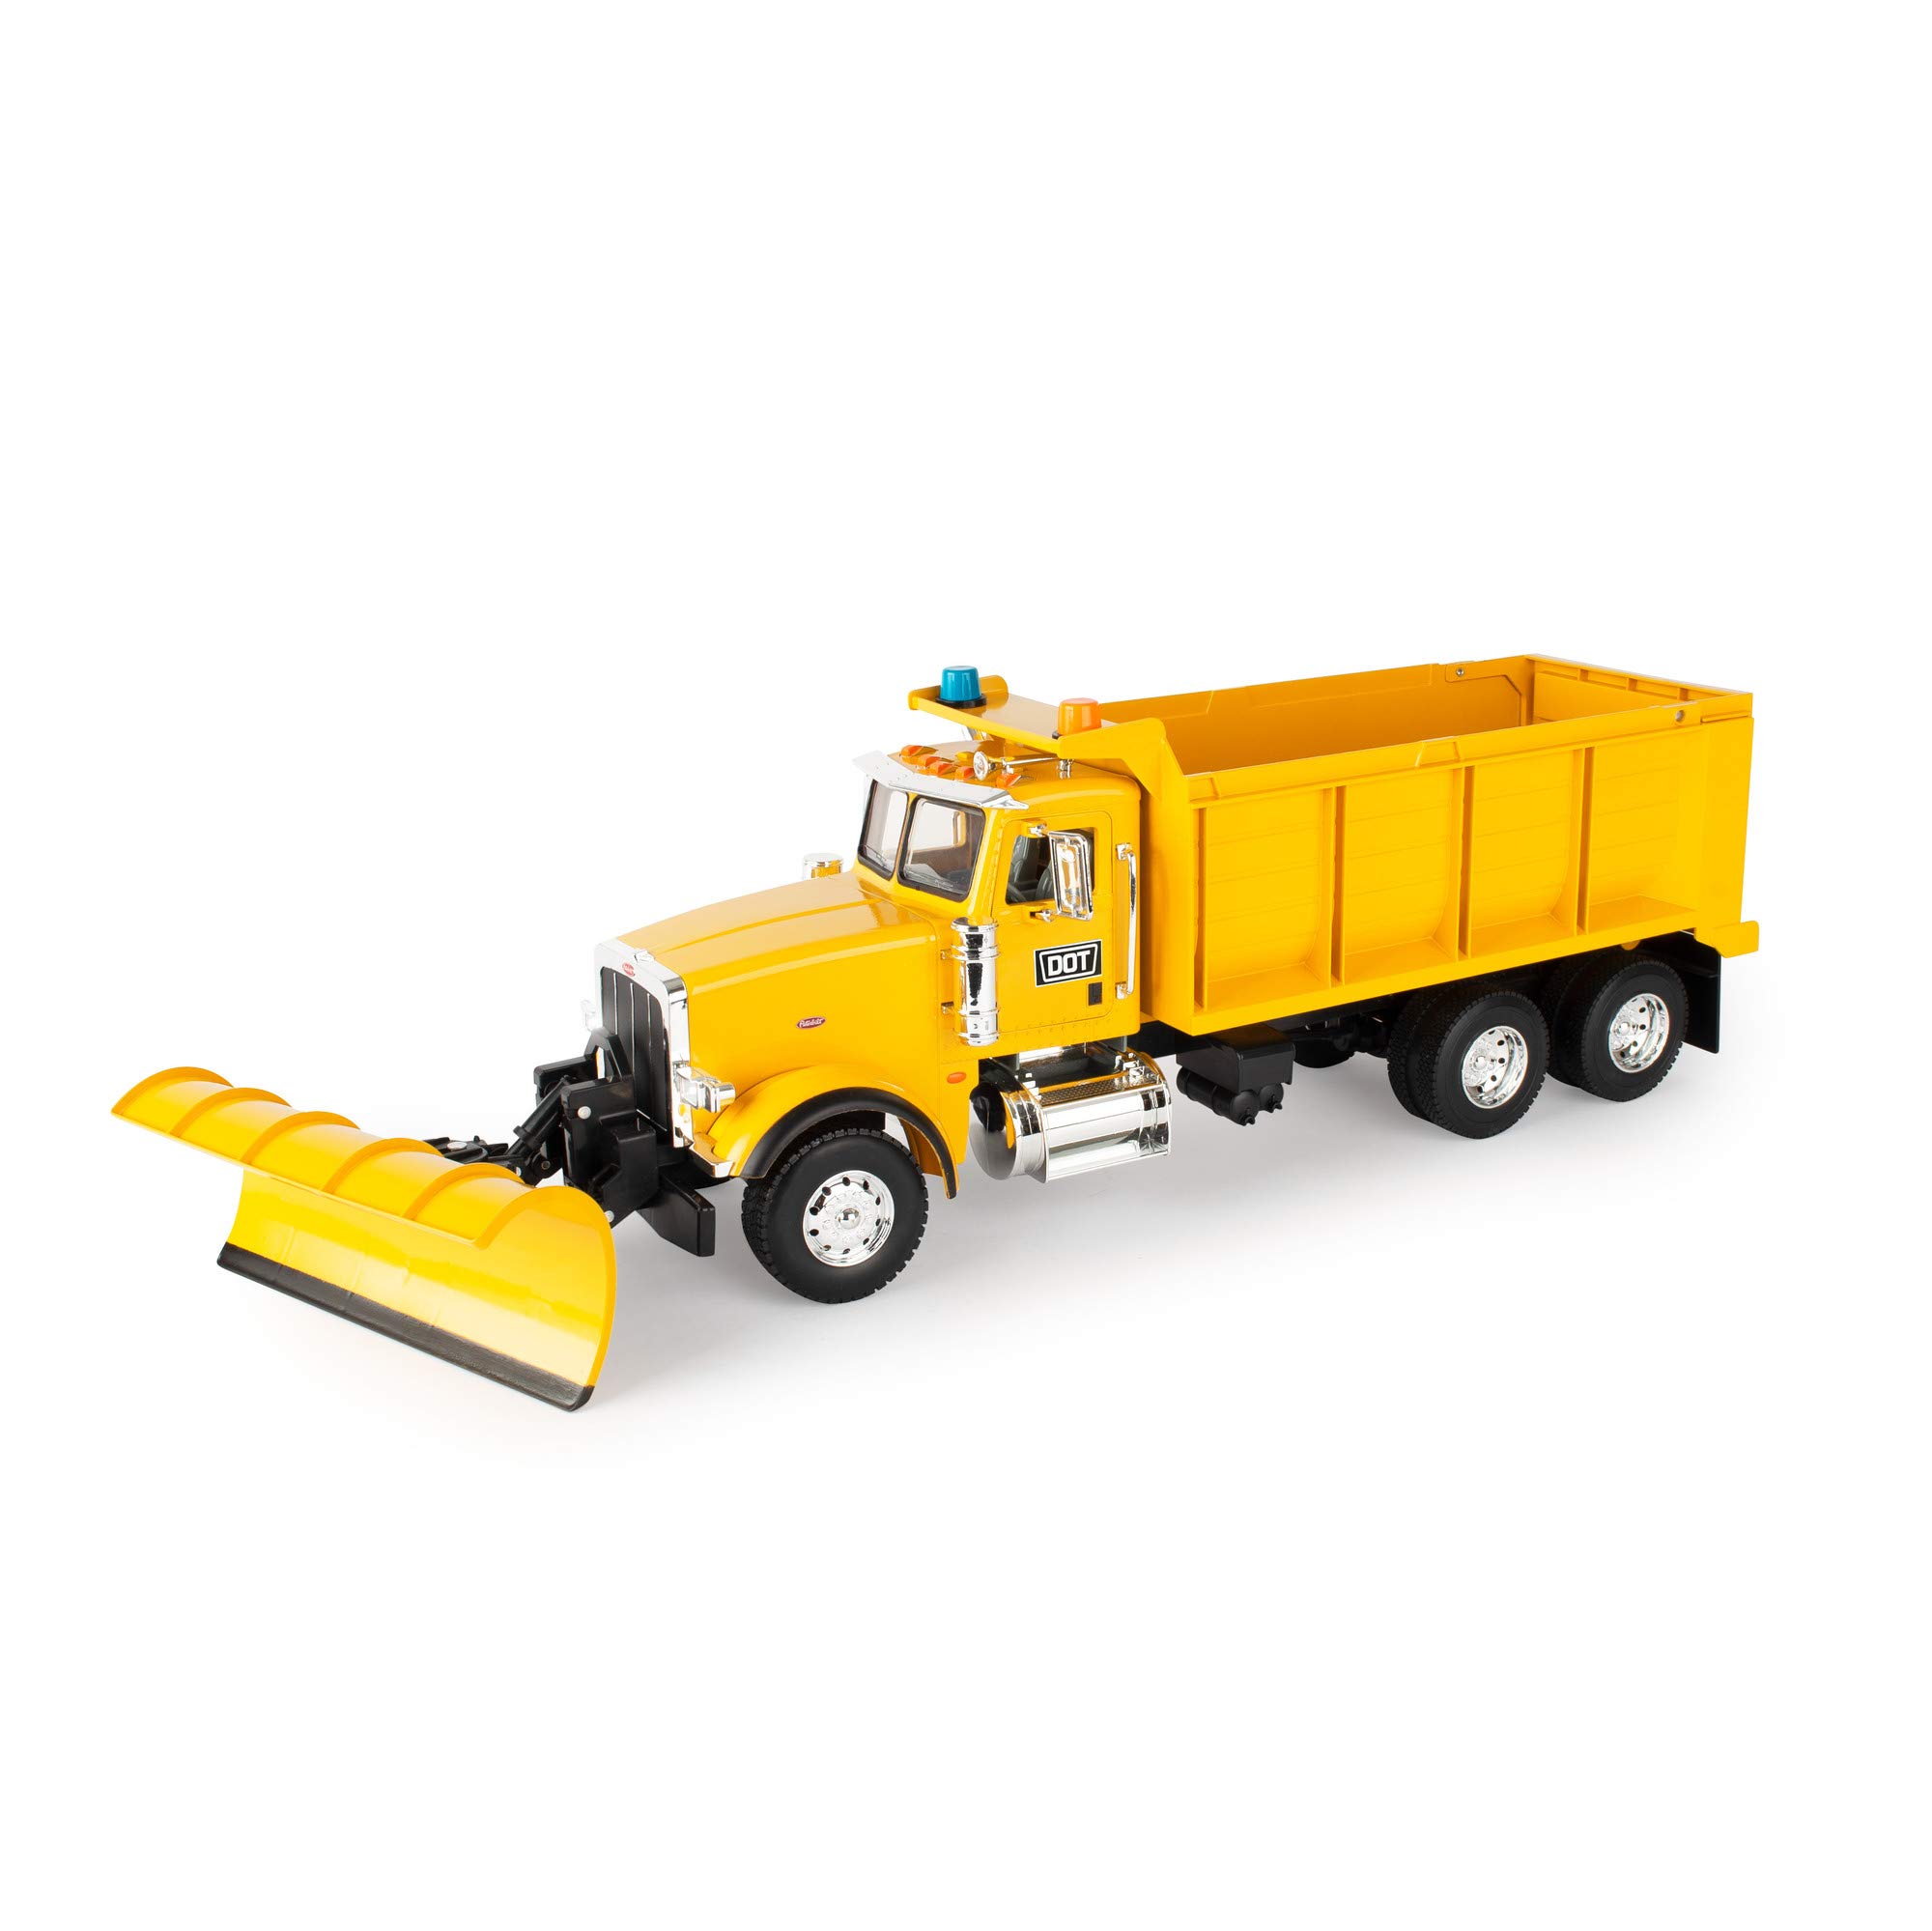 Tomy ERTL Big Farm 1:16 Scale Peterbilt Snow Plow Truck with Dump Box Toy for Kids, Yellow, 3 Years and Up